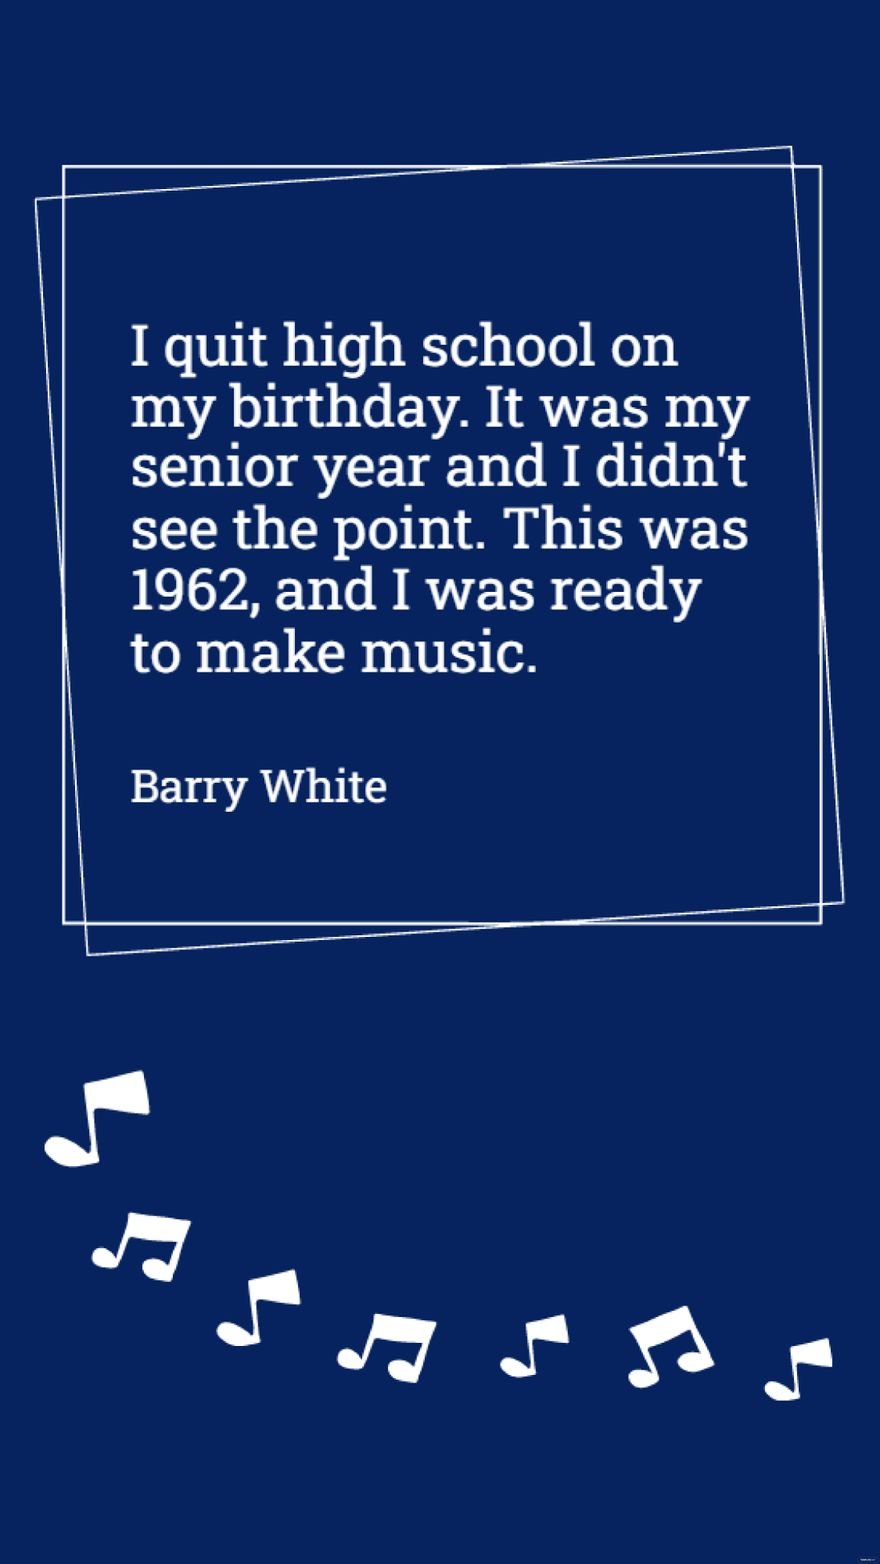 Free Barry White - I quit high school on my birthday. It was my senior year and I didn't see the point. This was 1962, and I was ready to make music. in JPG